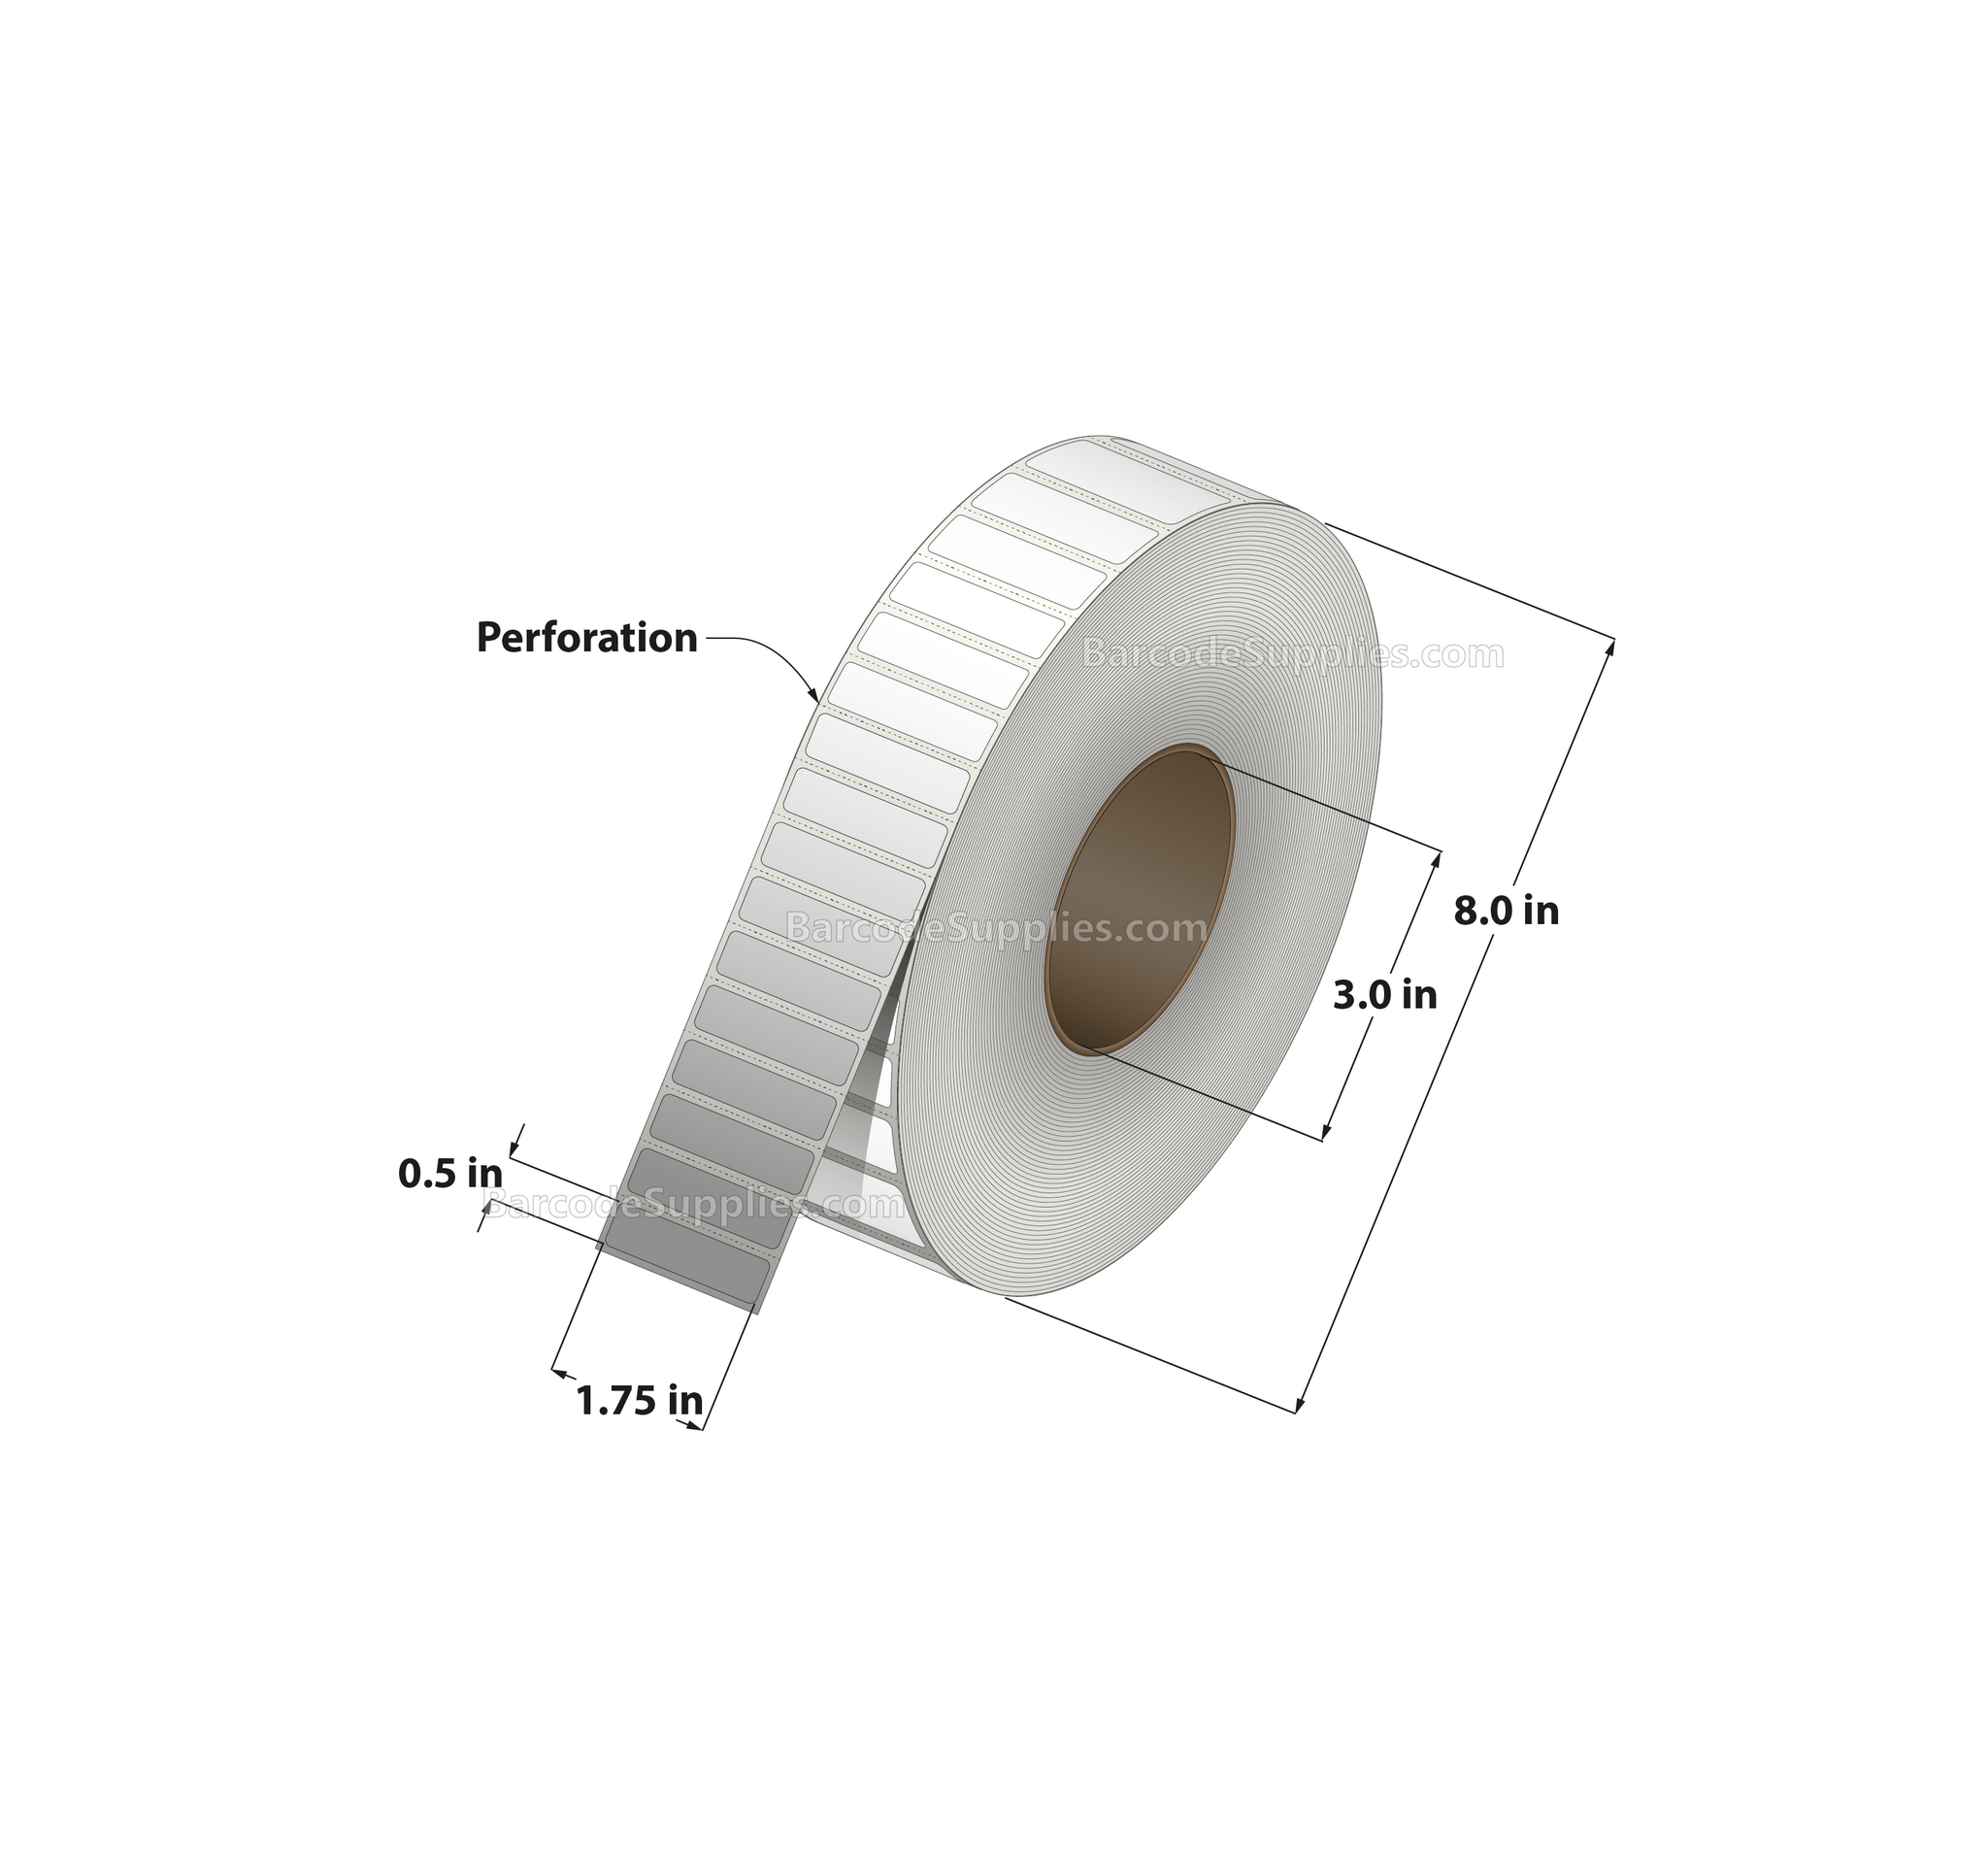 1.75 x 0.5 Thermal Transfer White Labels With Permanent Adhesive - Perforated - 10,000 Labels Per Roll - Carton Of 8 Rolls - 80000 Labels Total - MPN: RP-175-05-10000-3